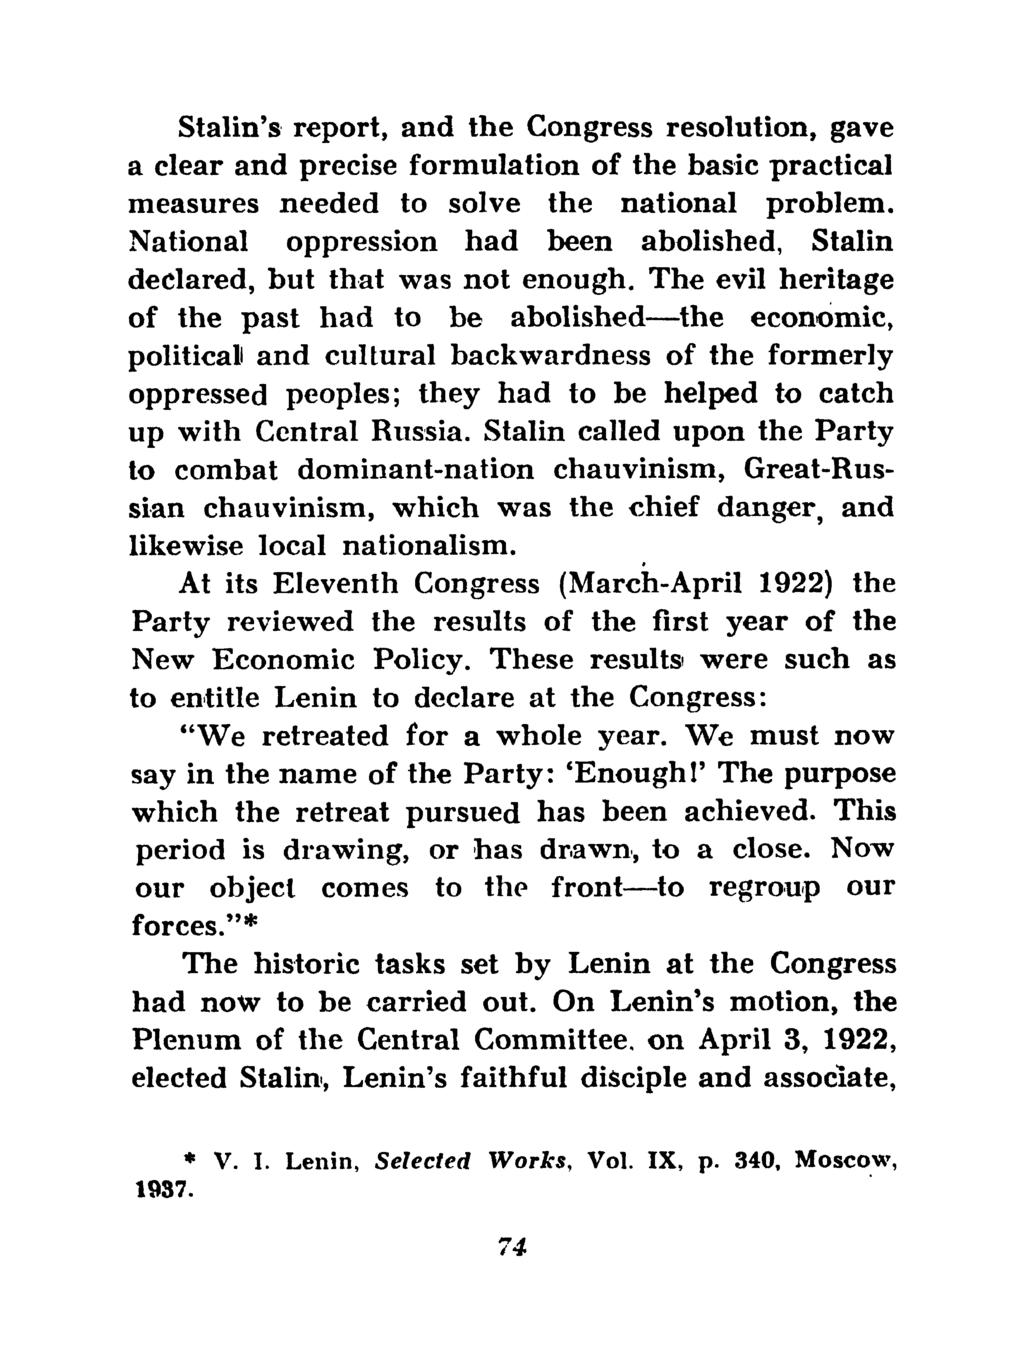 Stalin's report, and the Congress resolution, gave a clear and precise formulation of the basic practical measures needed to solve the national problem.